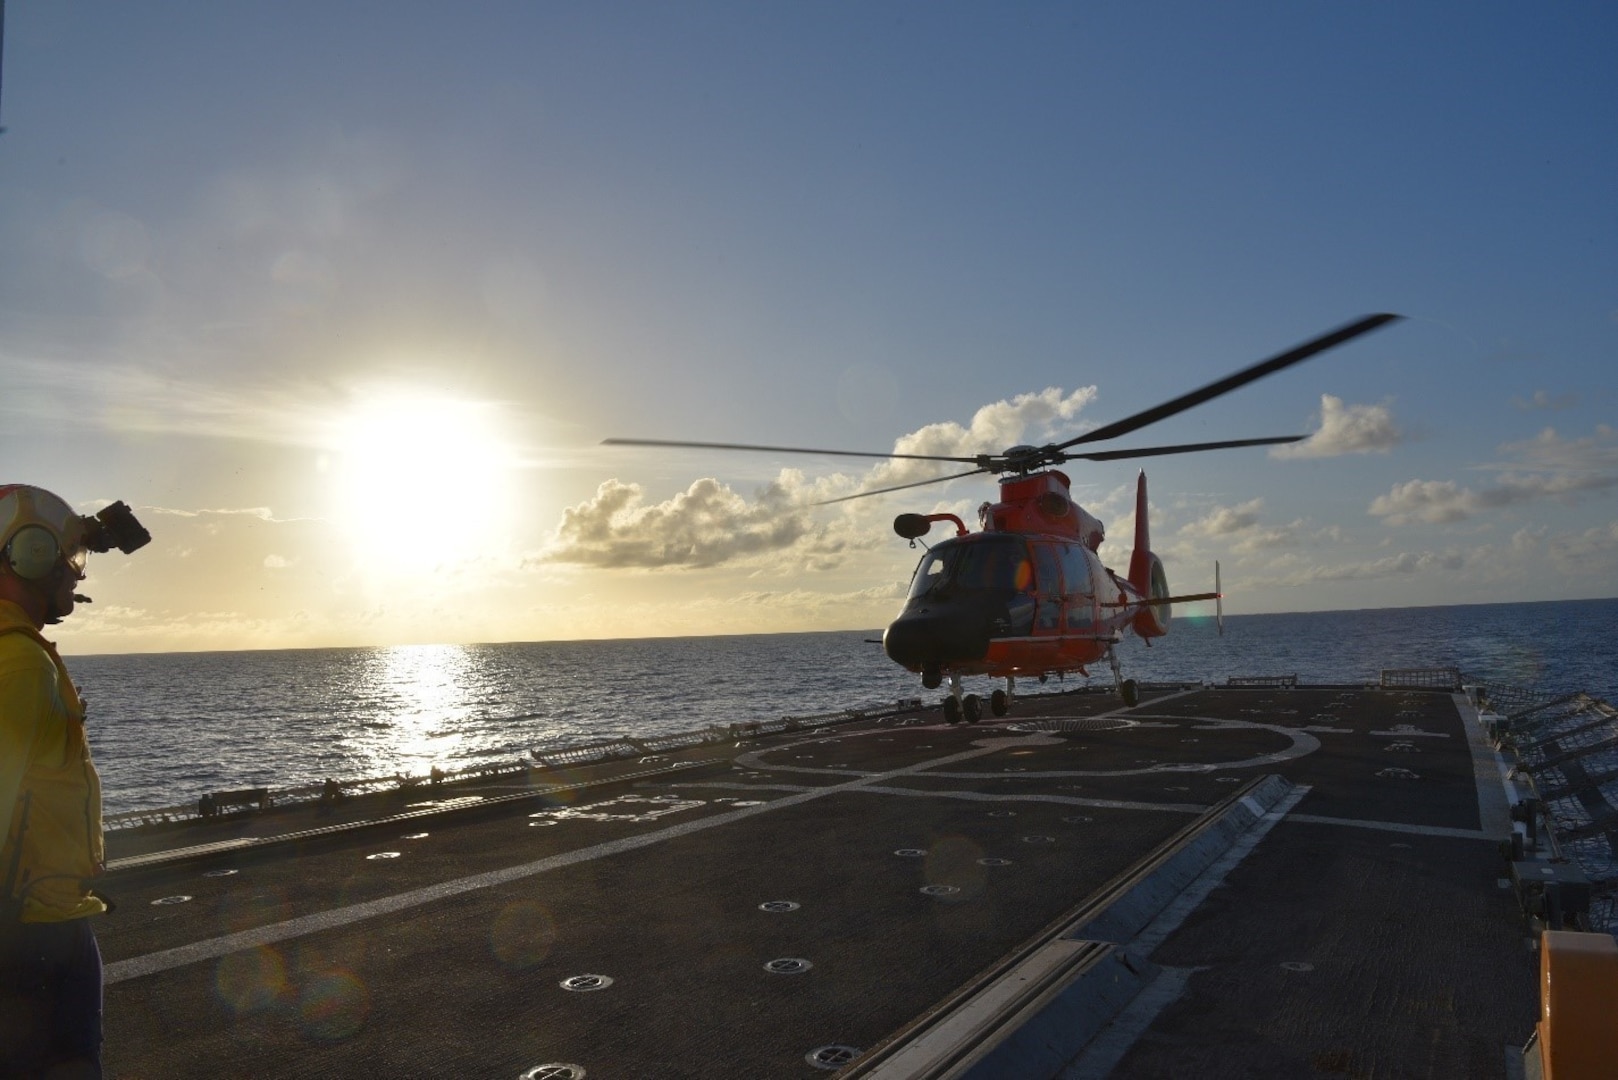 Crewmembers from the Coast Guard Cutter Harriet Lane conduct sunset flight operations with an MH-65 Dolphin aircrew from Coast Guard Air Station Miami in the Caribbean Sea.